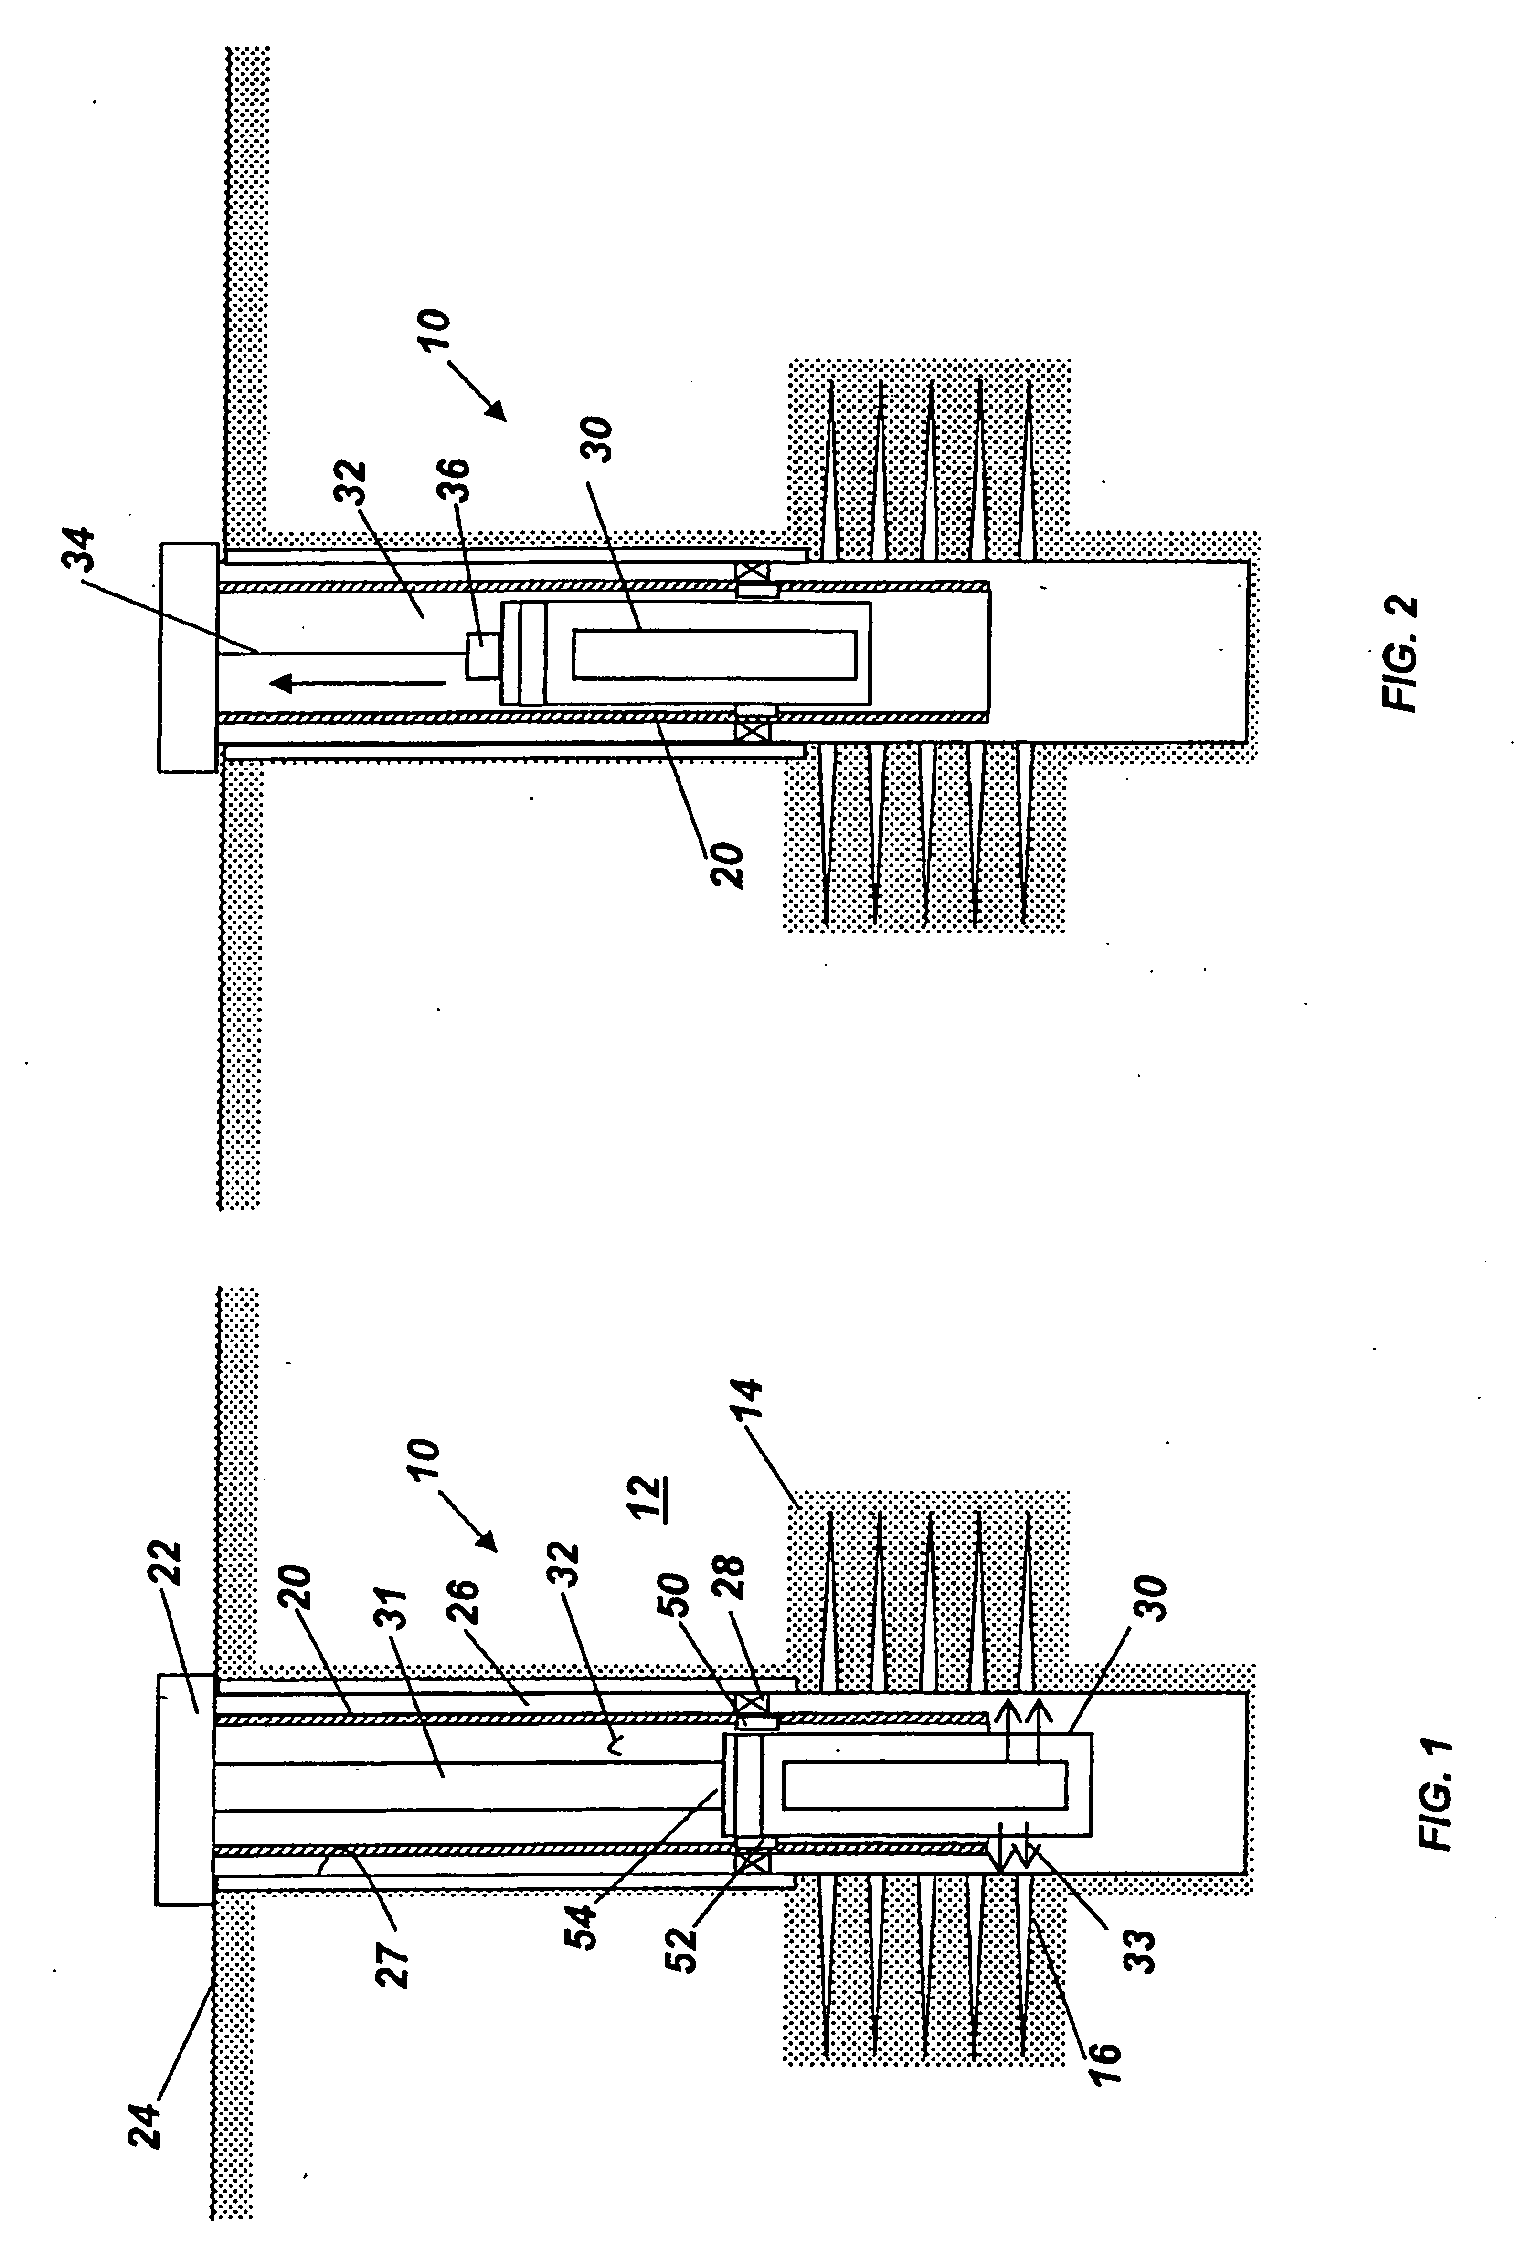 Wireline retrievable dsg/downhole pump system for cyclic steam and continuous steam flooding operations in petroleum reservoirs